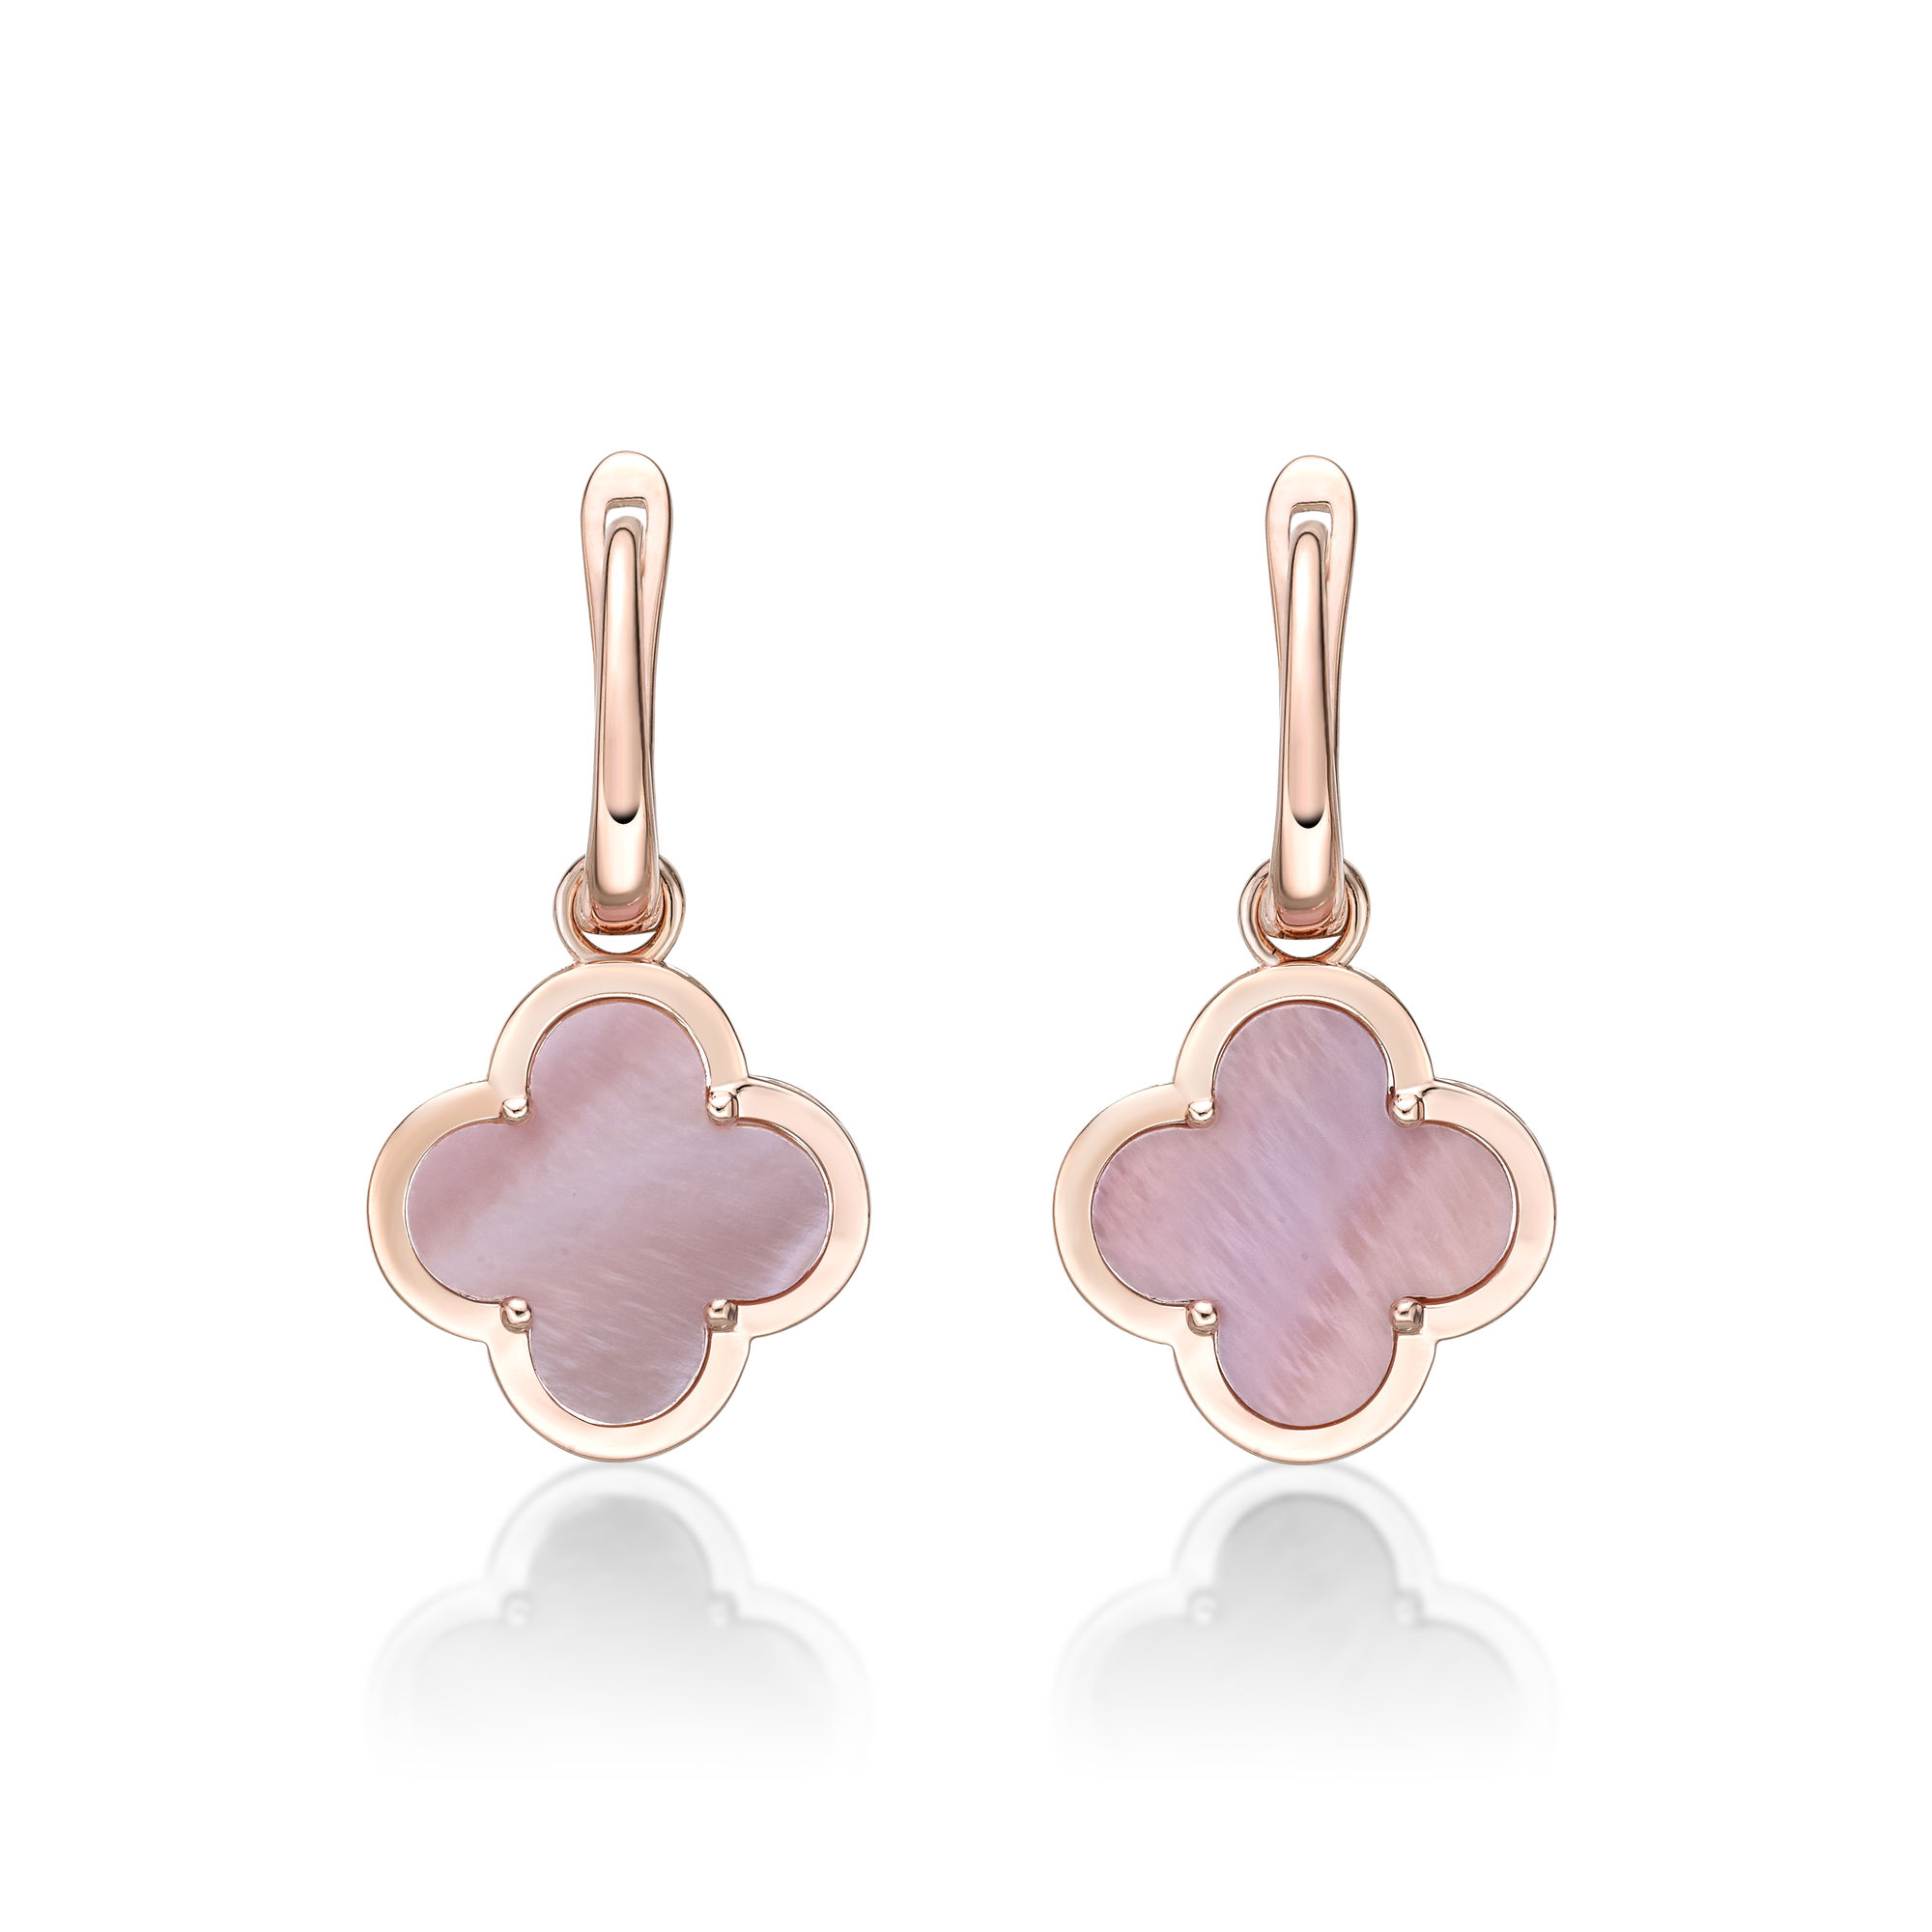 Lavari Jewelers Women's Mother of Pearl Flower Drop Earrings with Rose Gold Plating and Hinged Post, 925 Sterling Silver